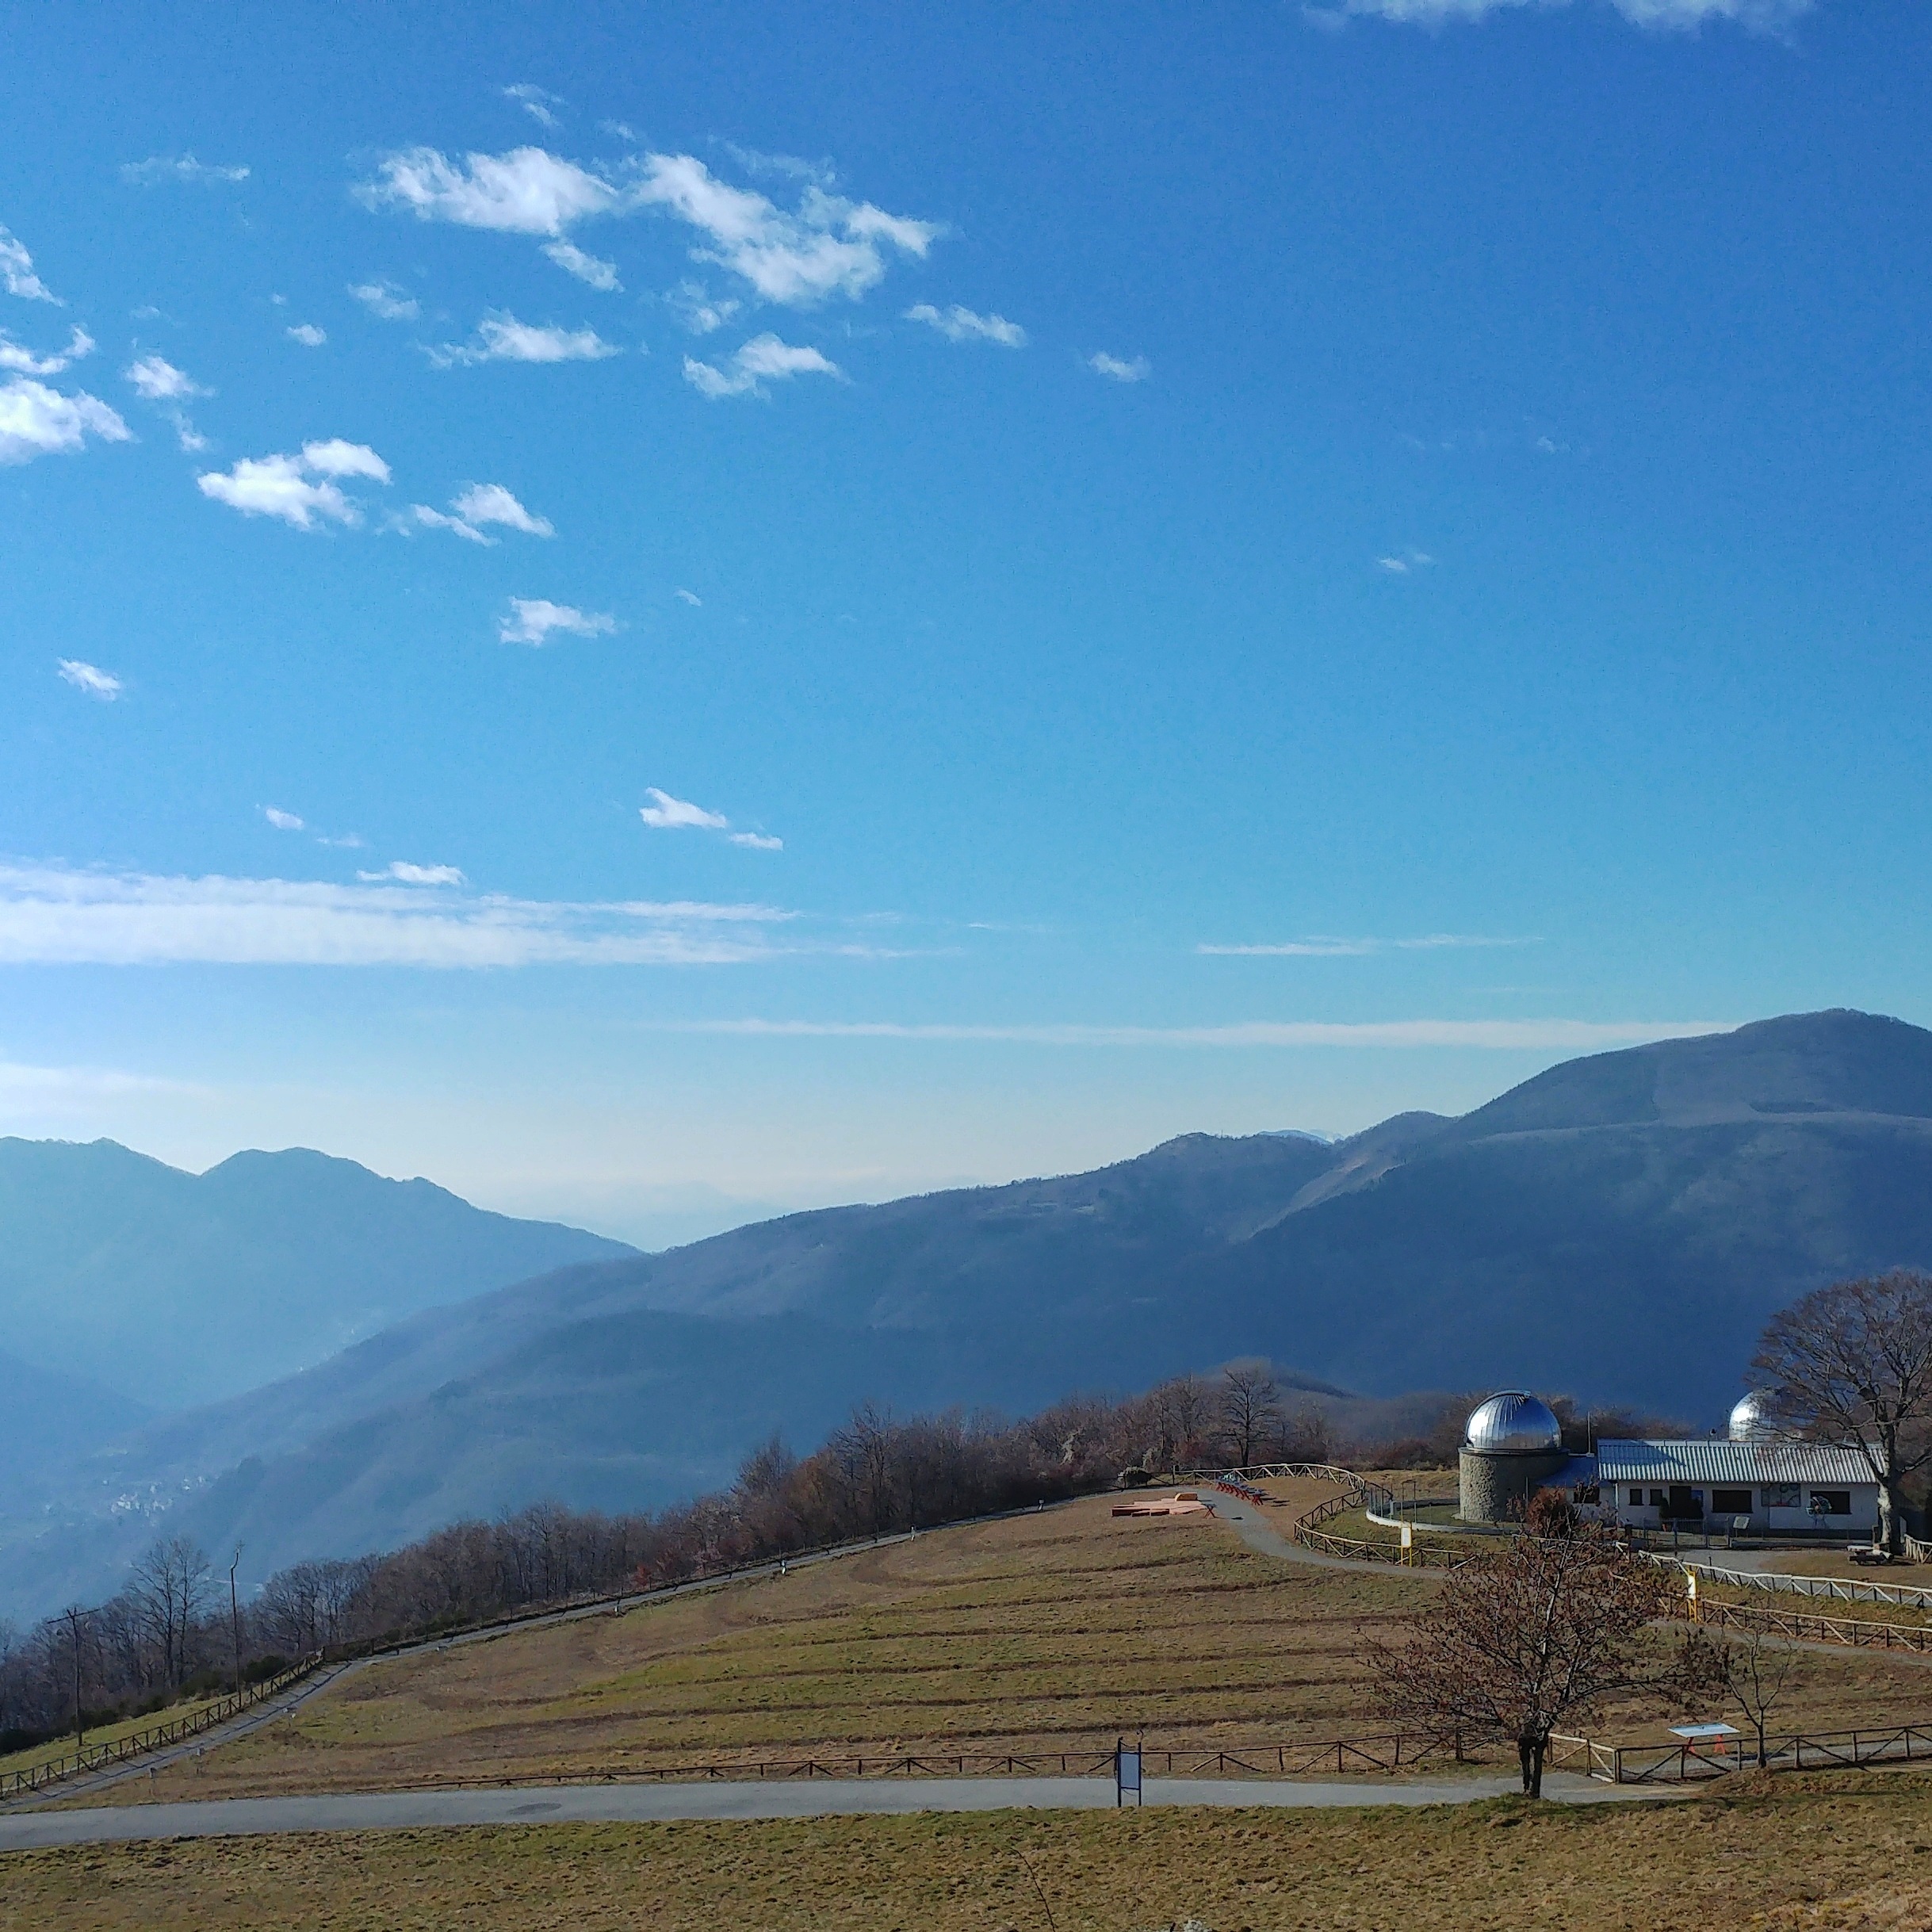 The Pistoia Mountains Astronomical Observatory and the Stars Park